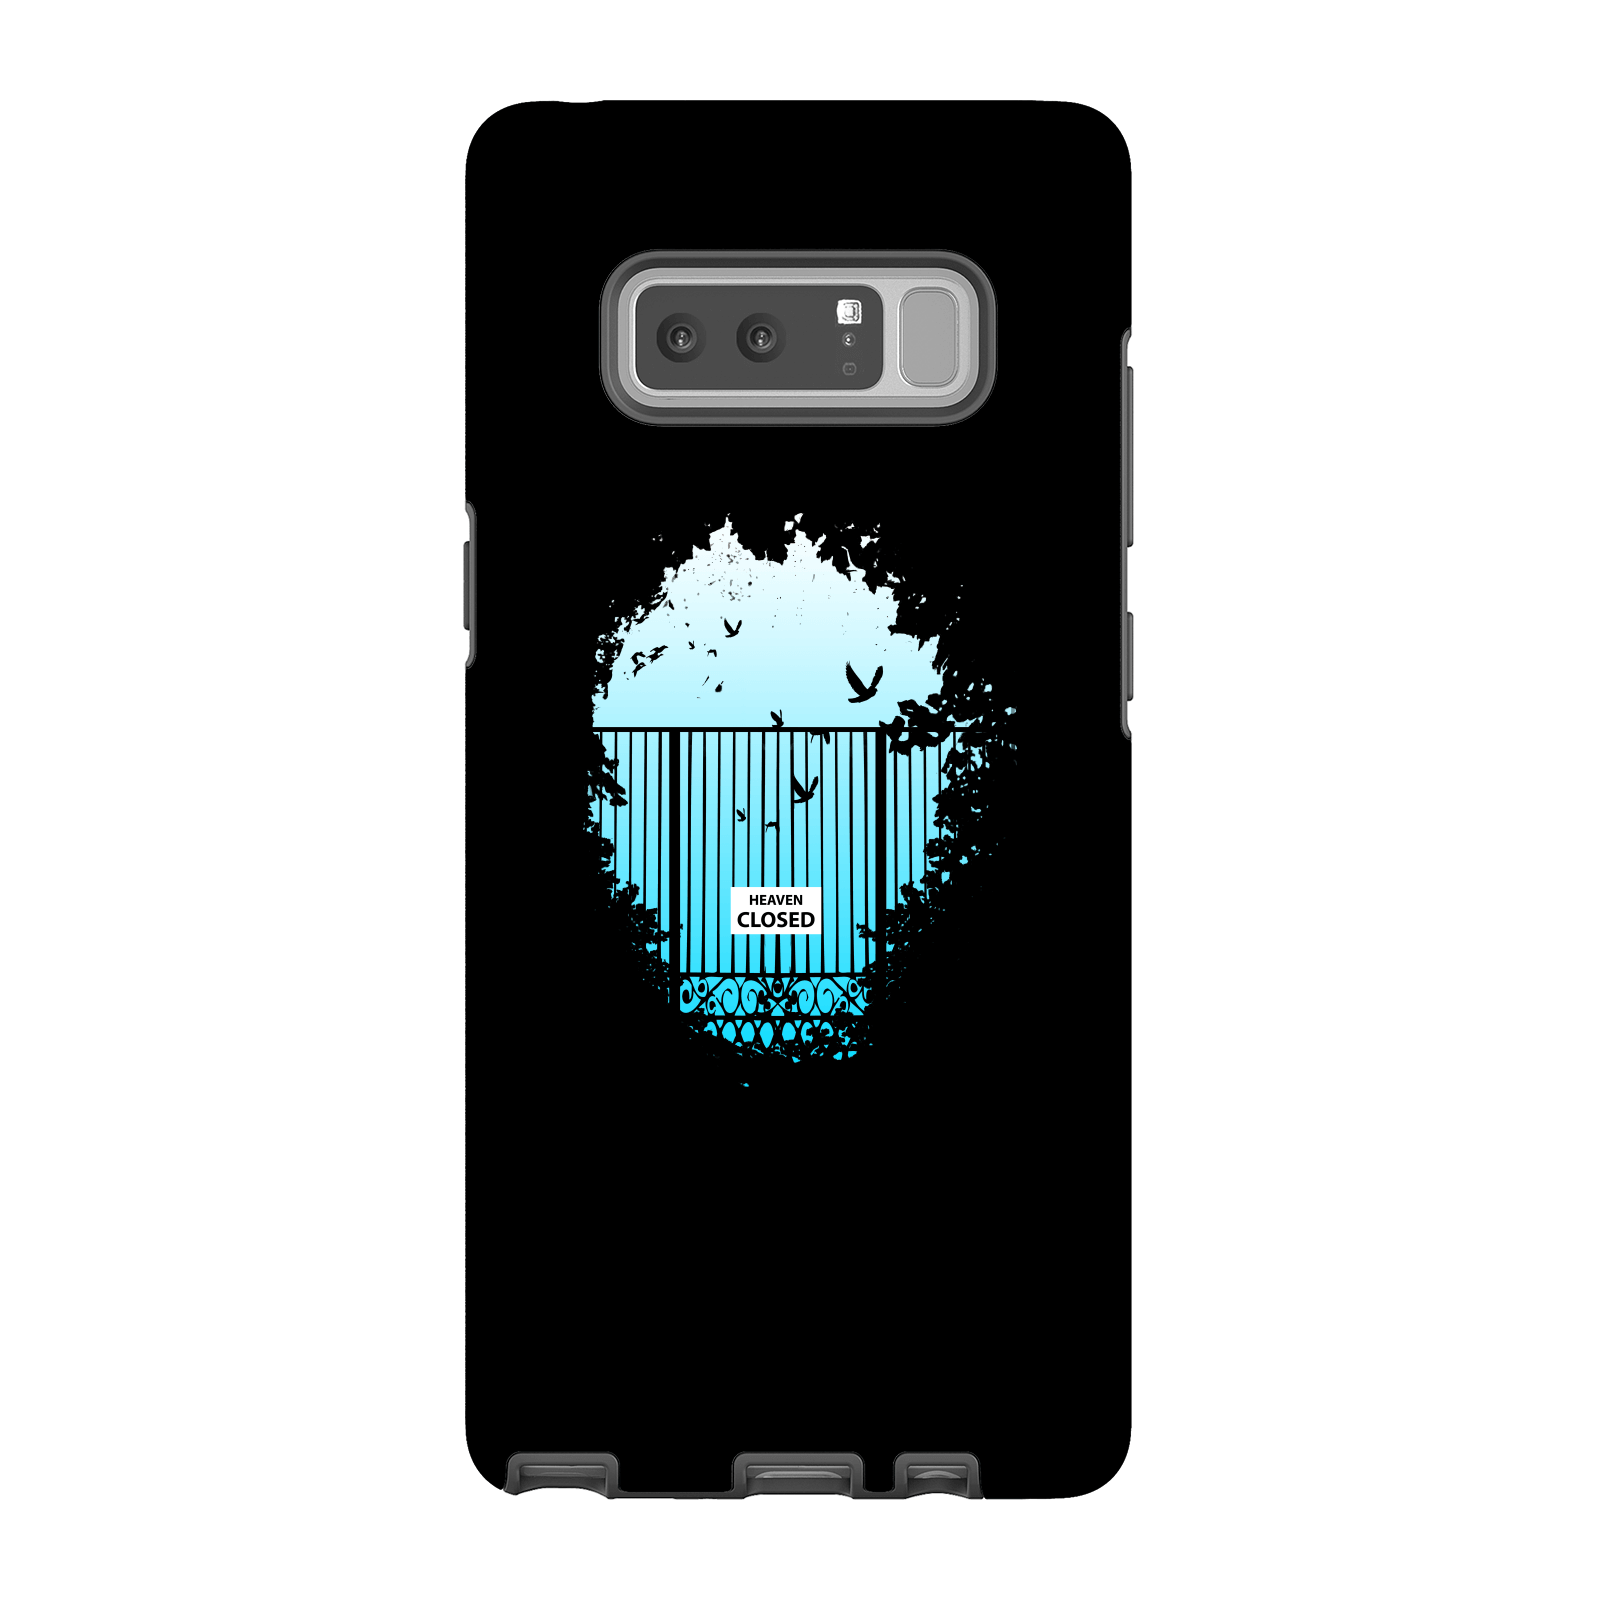 Balazs Solti Heavens Closed Phone Case For Iphone And Android - Samsung Note 8 - Tough Case - Matte